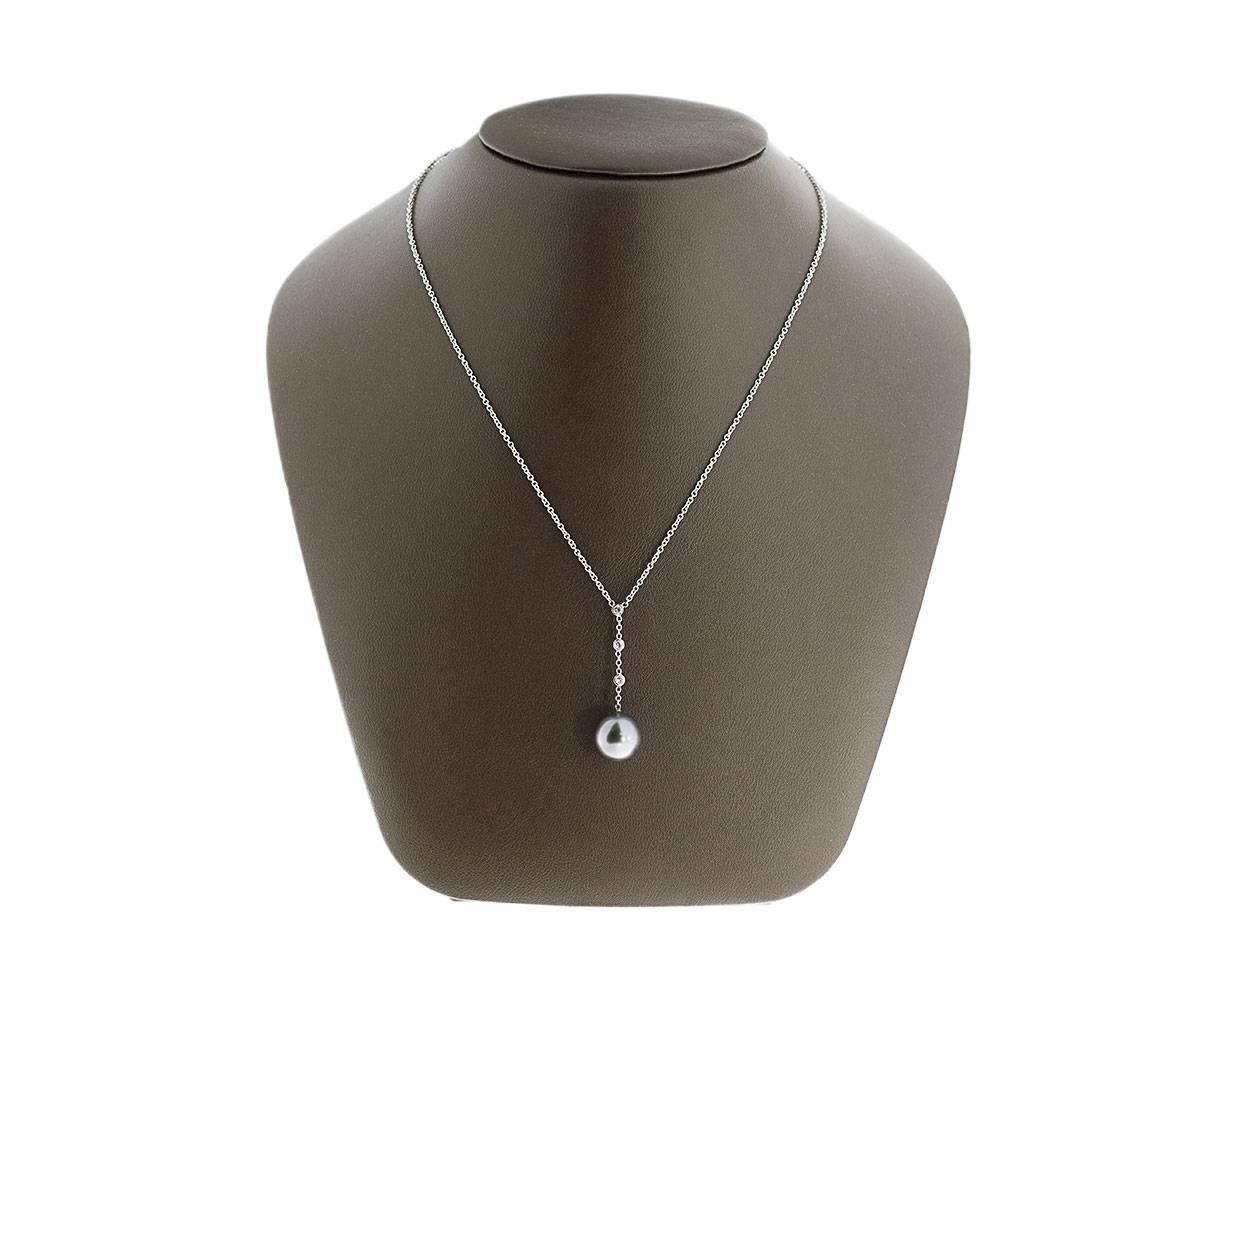 Simple yet elegant & beautiful would be the best way to describe this stunning 18K white gold Tahitian pearl and diamond pendant necklace! It features a round pearl and 3 round diamonds. The pearl and diamond pendant is attached to an 18K white